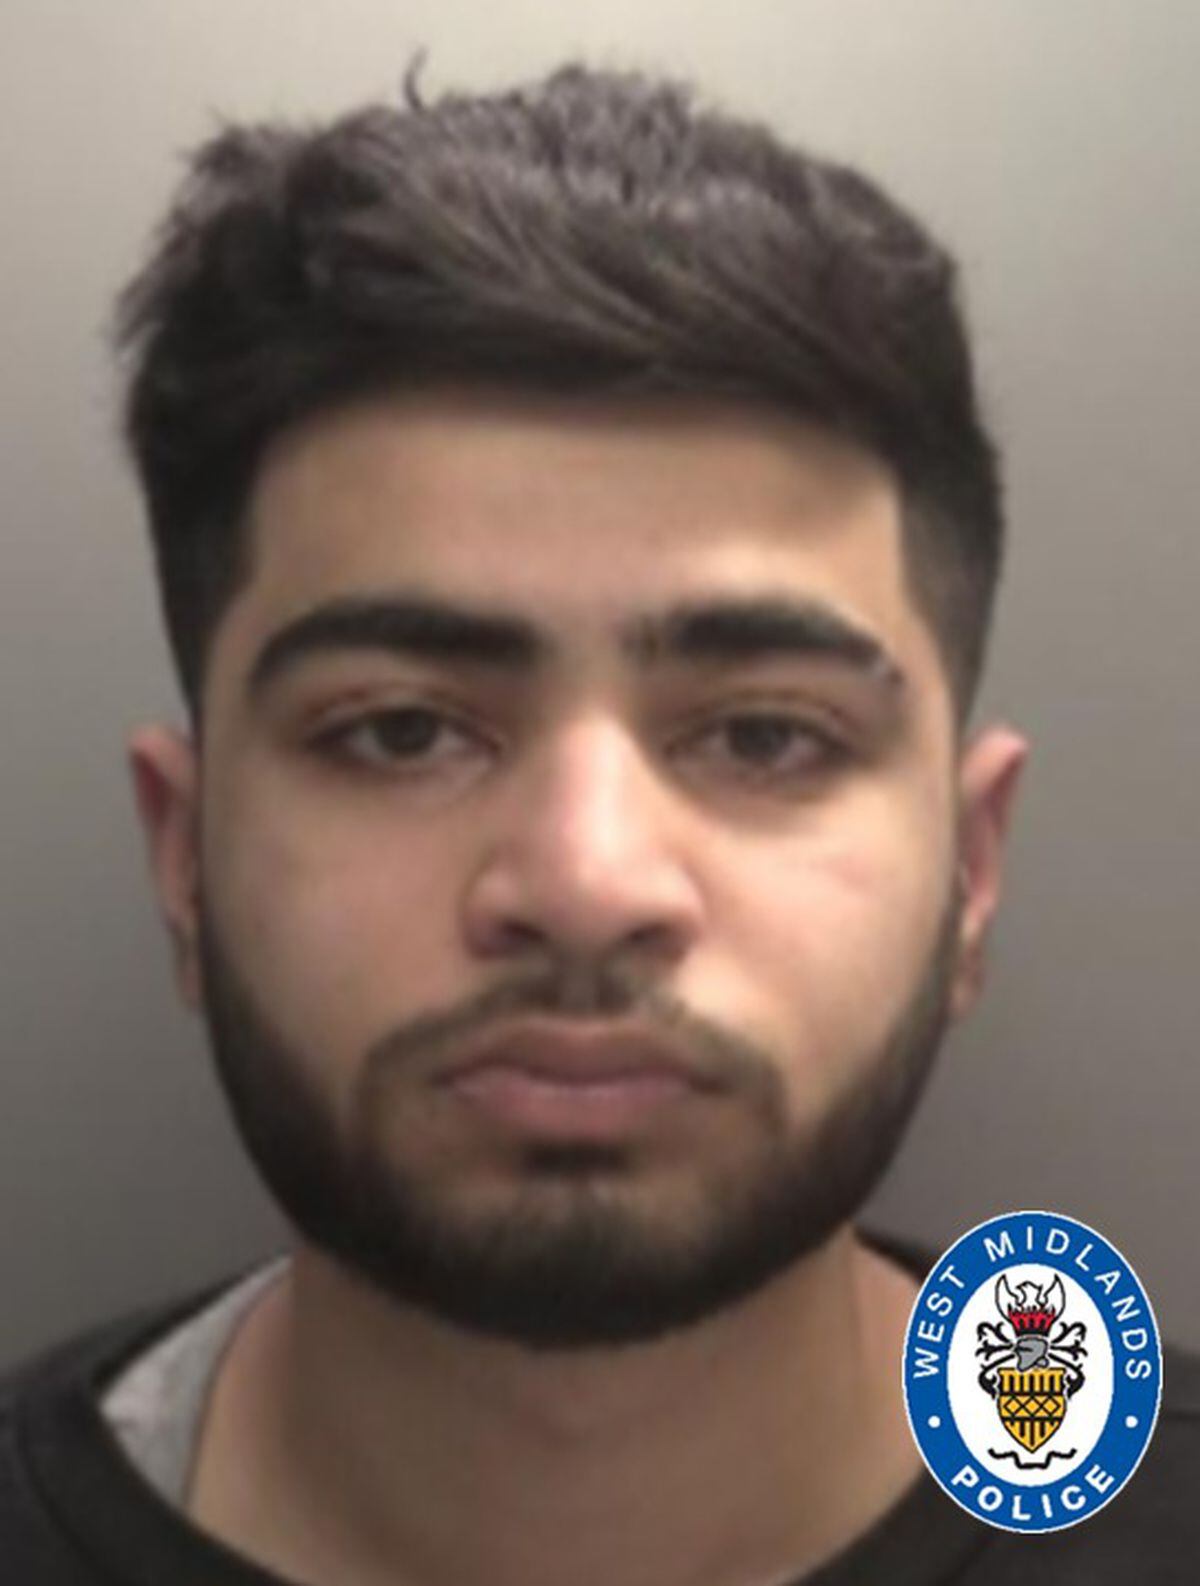 Daiyaan Arif was found guilty of manslaughter and jailed for three years and six months